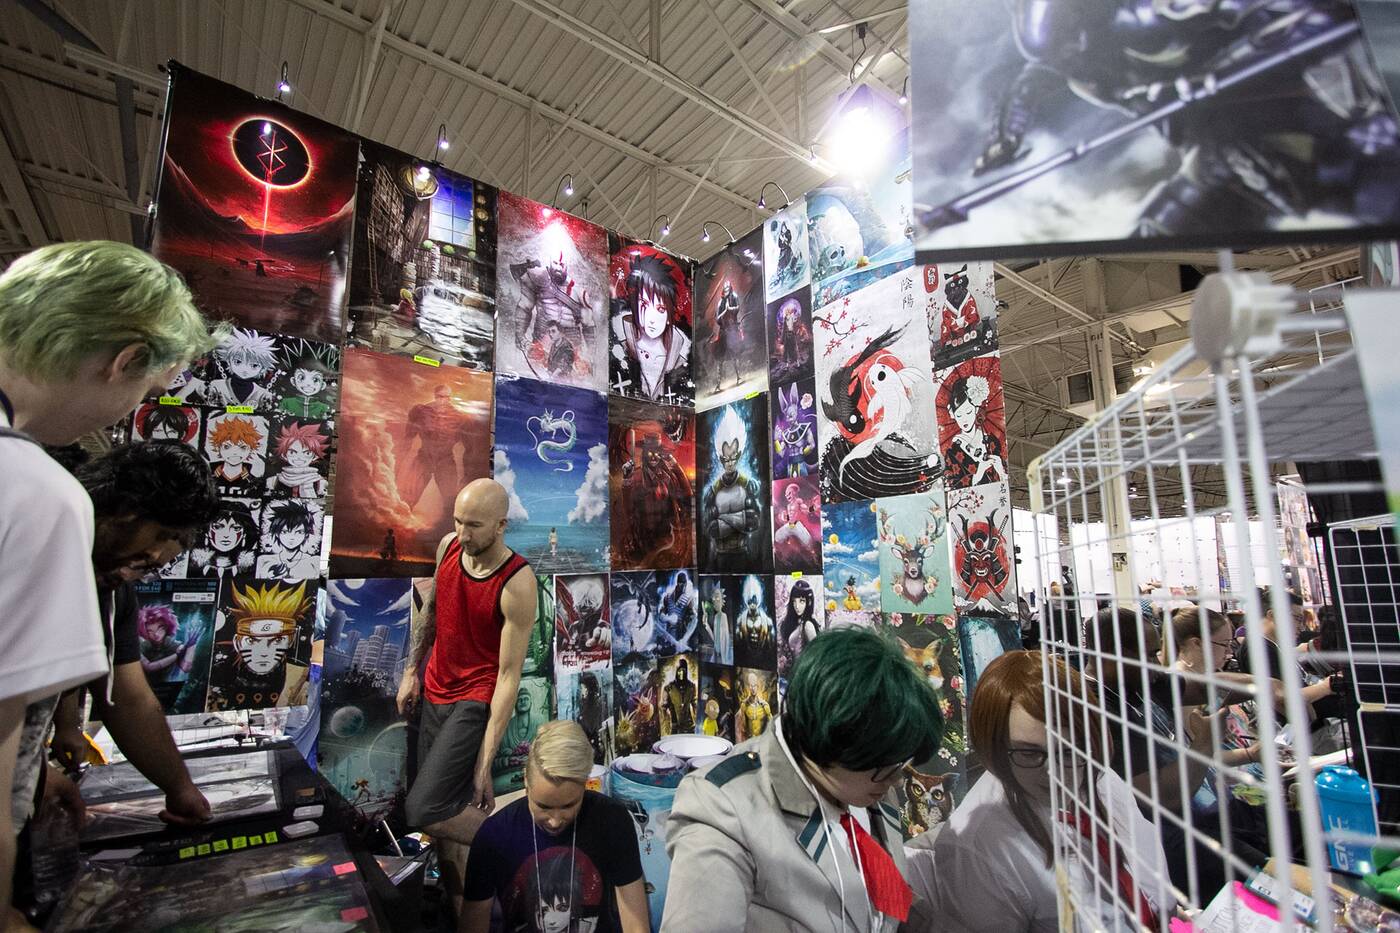 Japanese cosplay and anime get the spotlight in Toronto